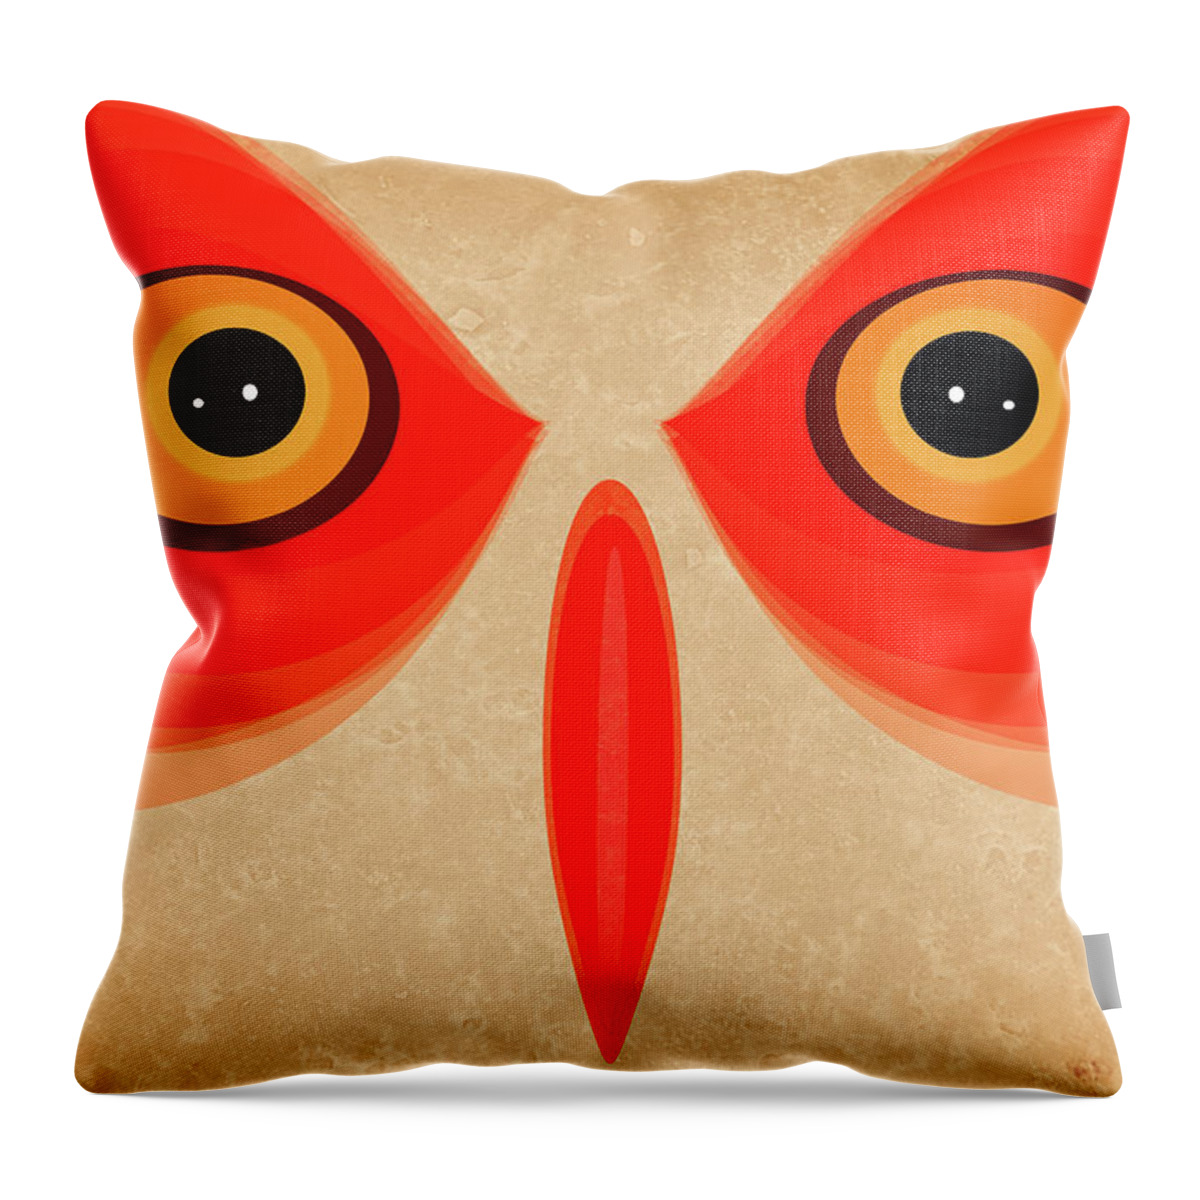 Owl Throw Pillow featuring the painting Owl by Johan Lilja